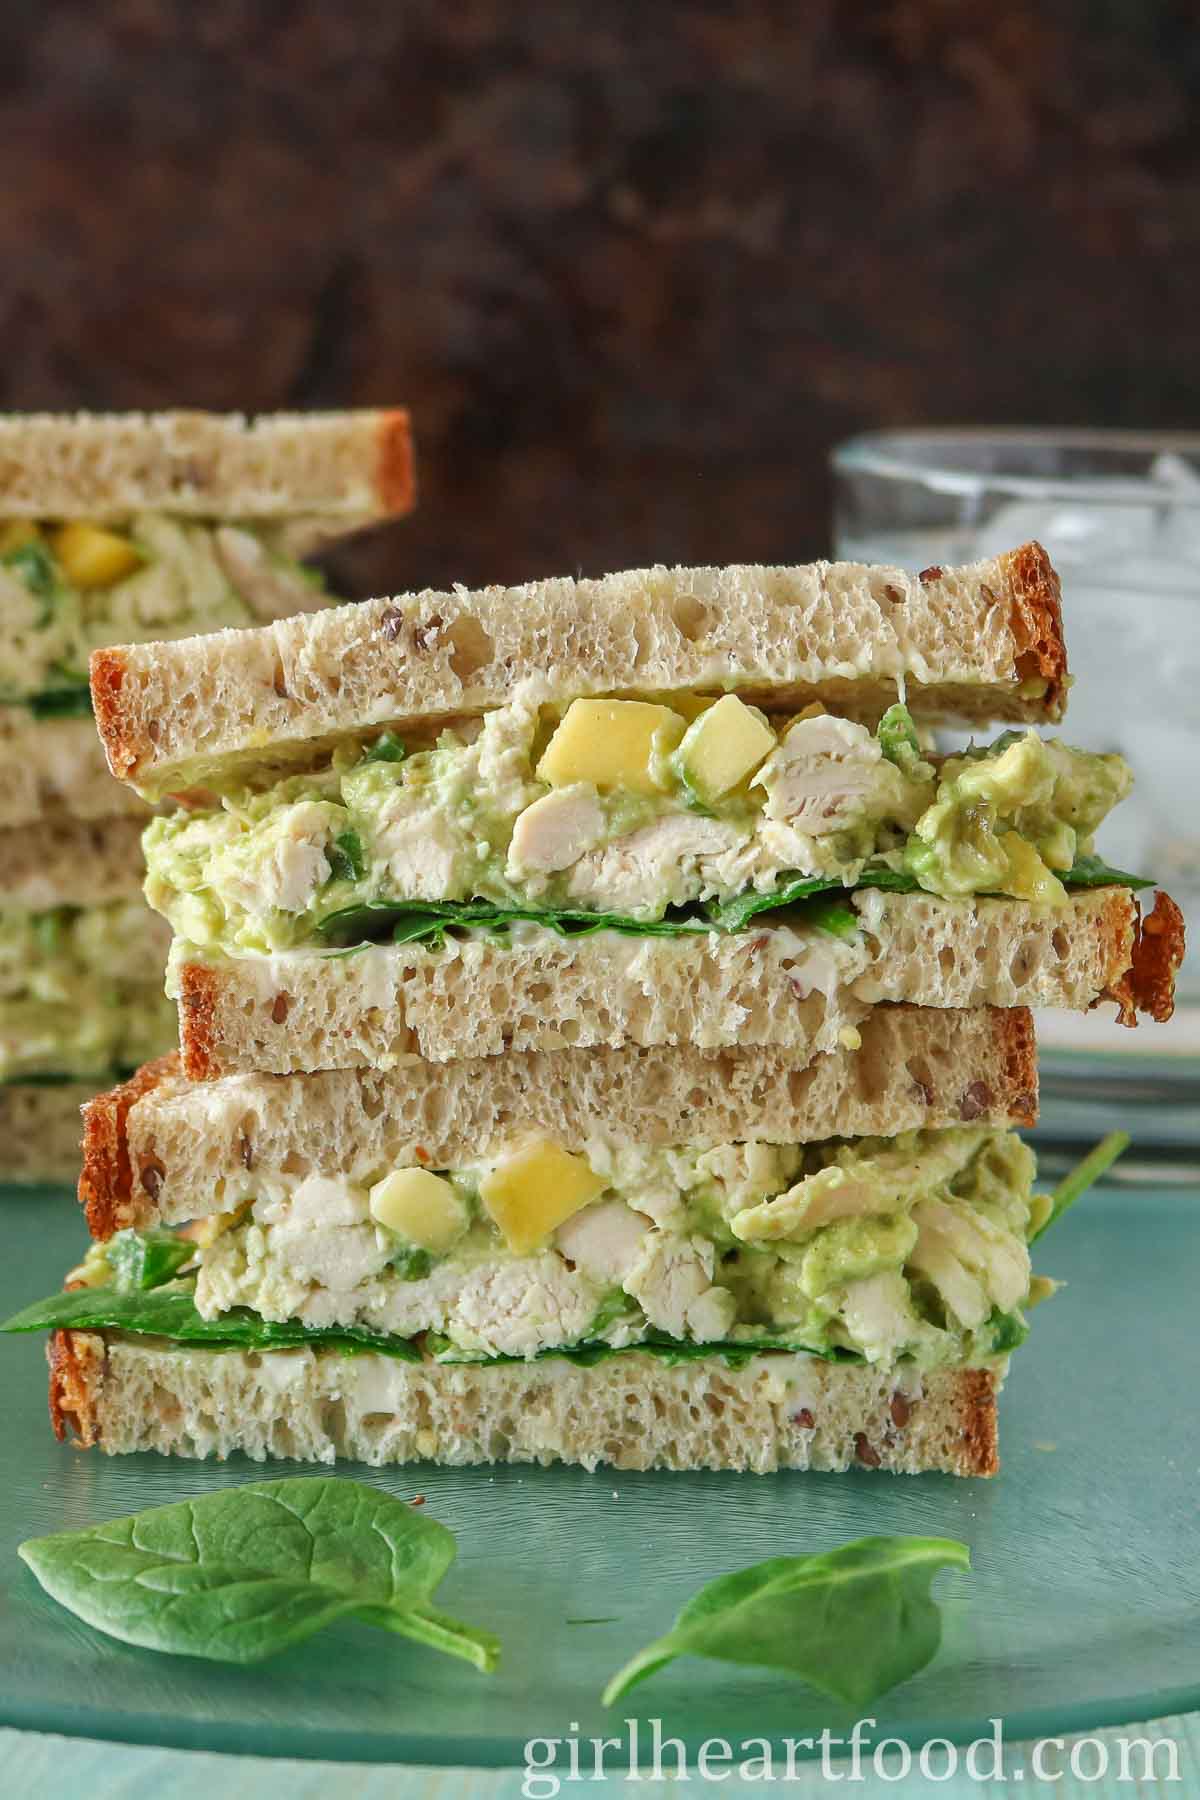 Stack of two halves of a chicken avocado sandwich.